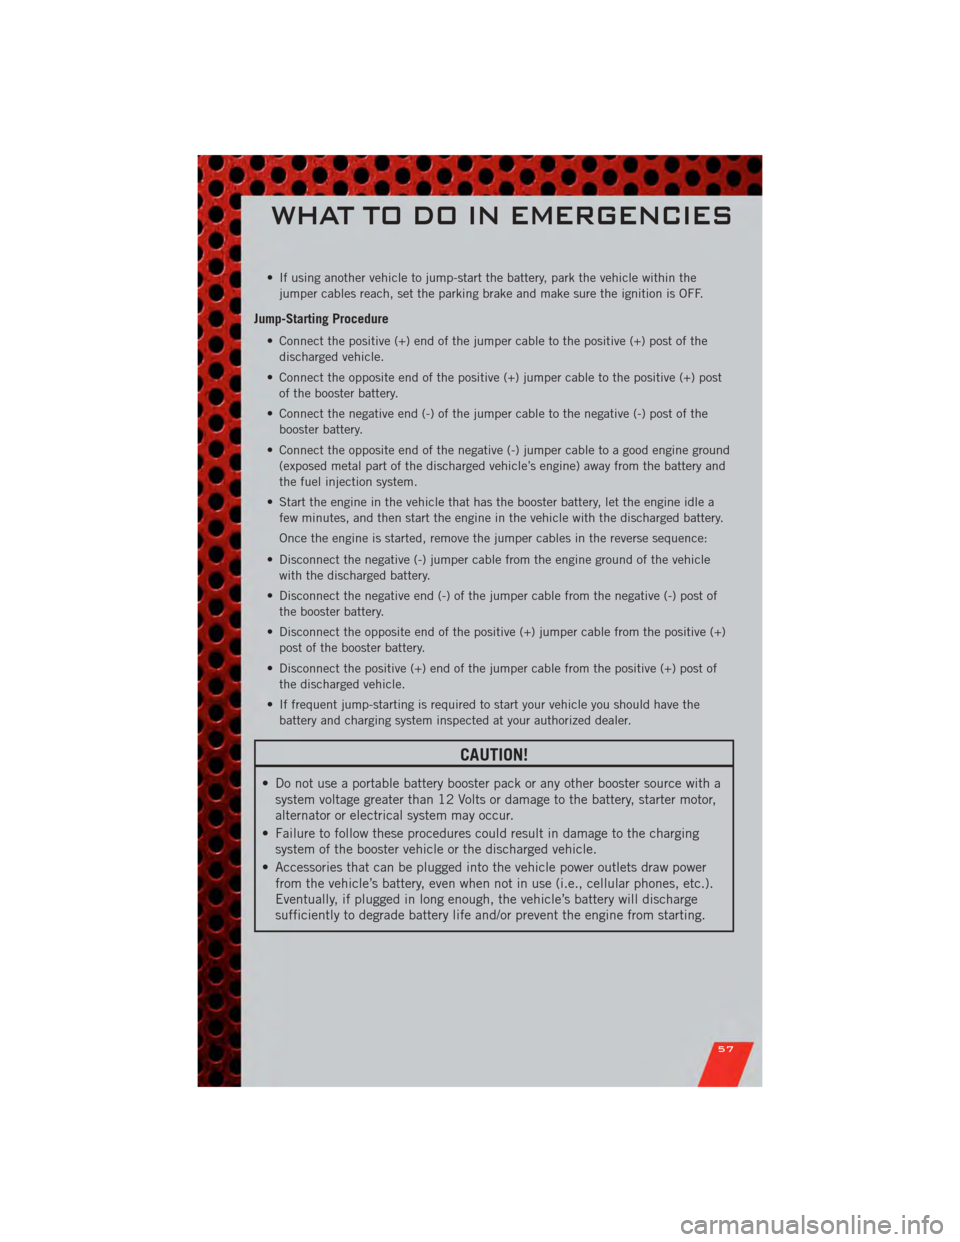 DODGE NITRO 2011 1.G Workshop Manual • If using another vehicle to jump-start the battery, park the vehicle within thejumper cables reach, set the parking brake and make sure the ignition is OFF.
Jump-Starting Procedure
• Connect the